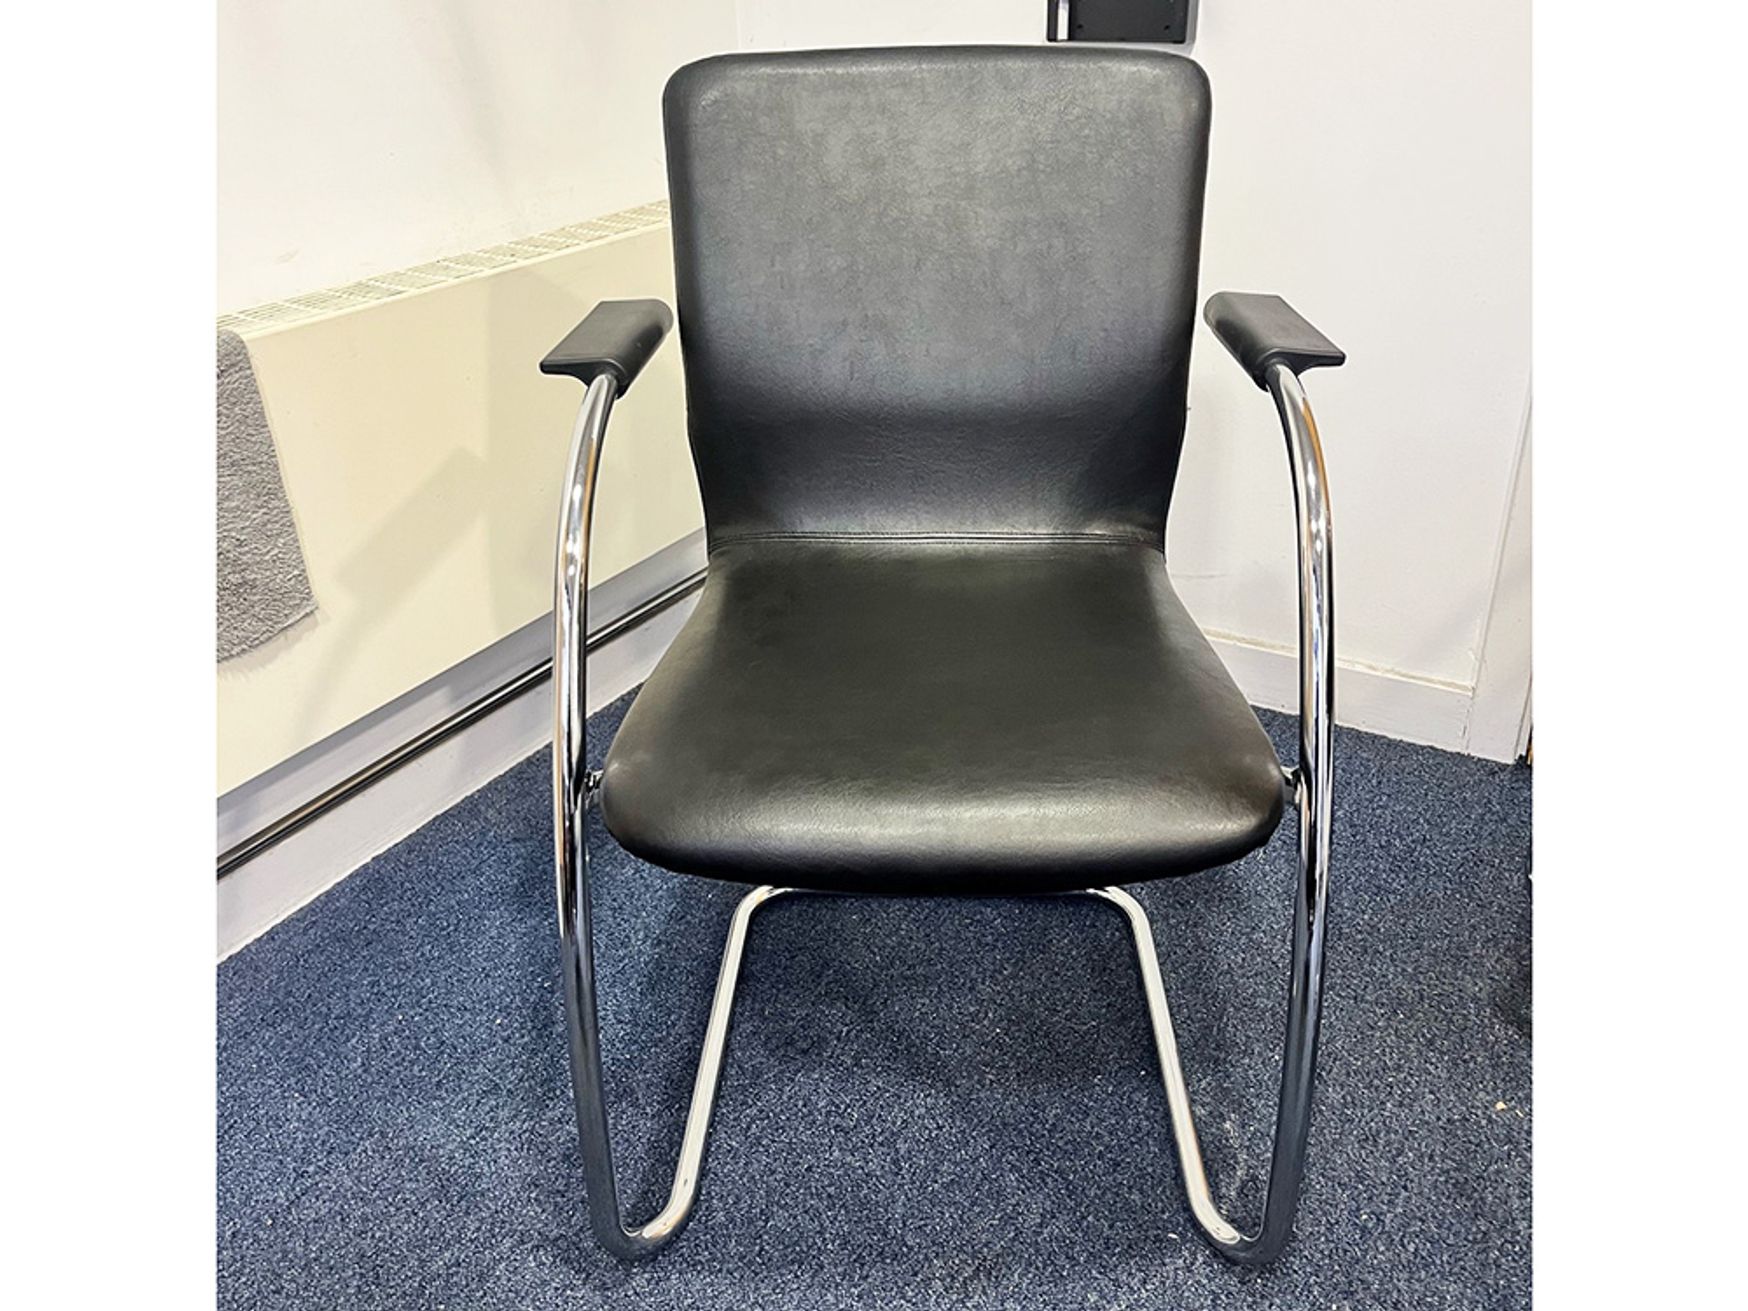 Used Orangebox 'Go' Cantilever Meeting Chairs in Black Leather